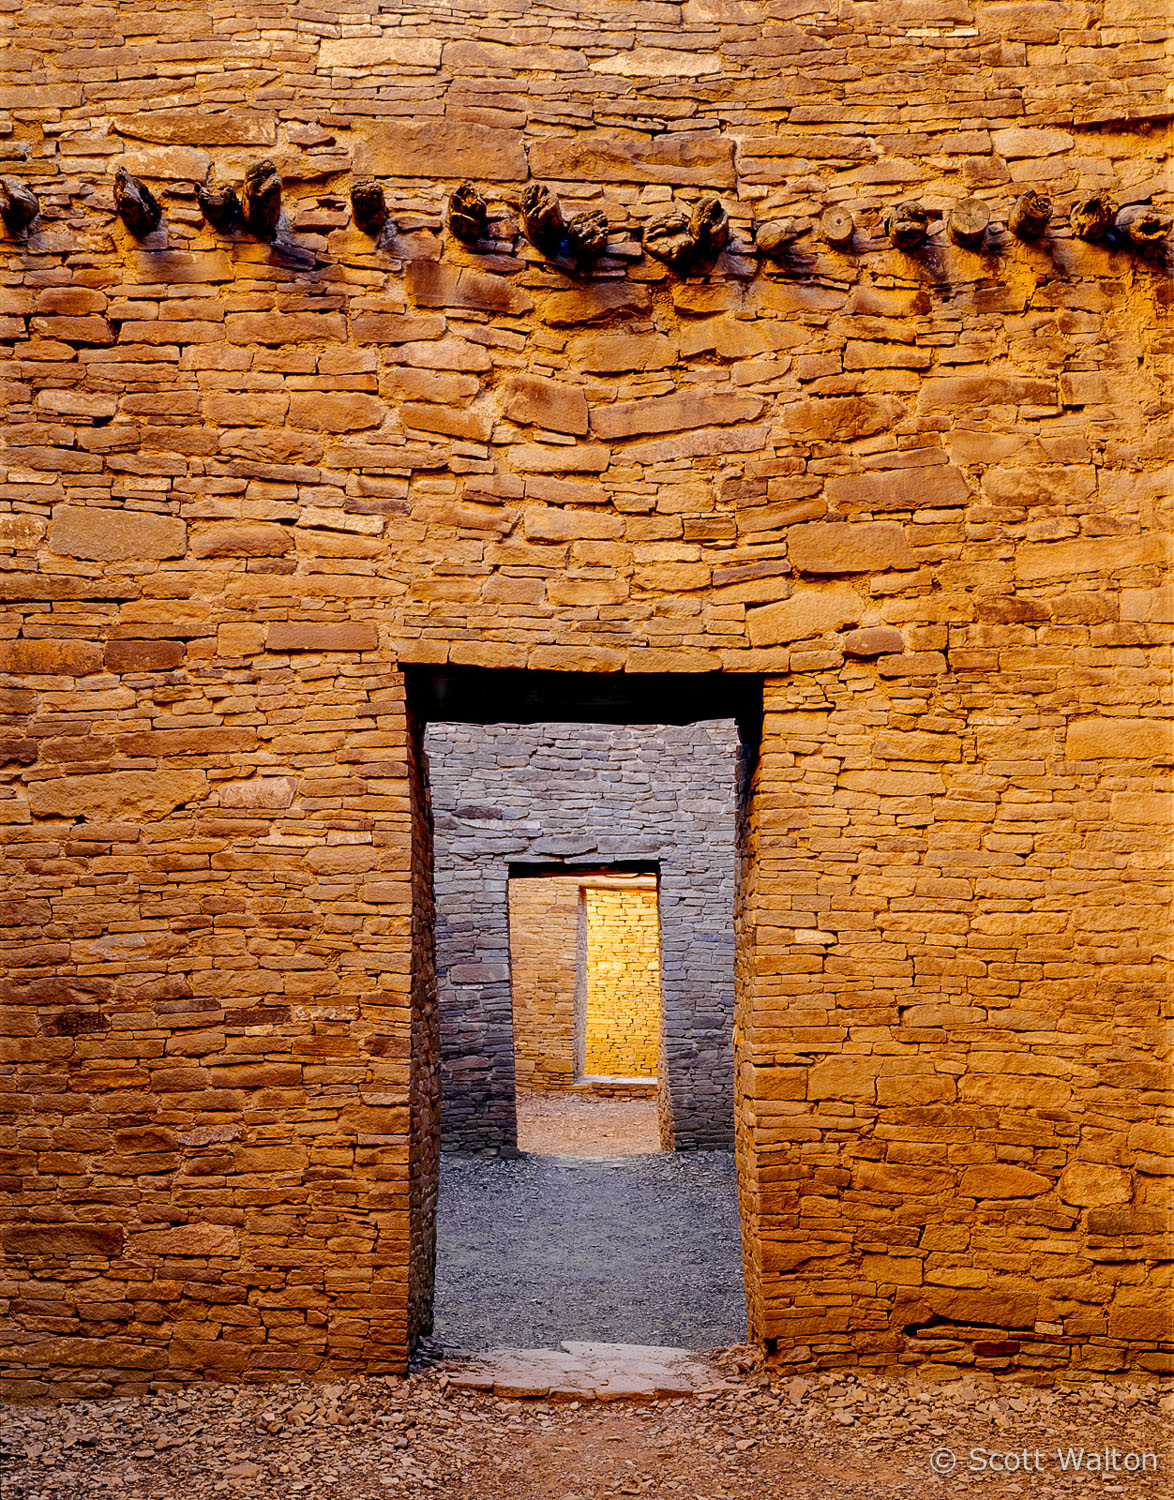 doors-and-wall-chaco-culture-national-historical-park-new-mexico.jpg